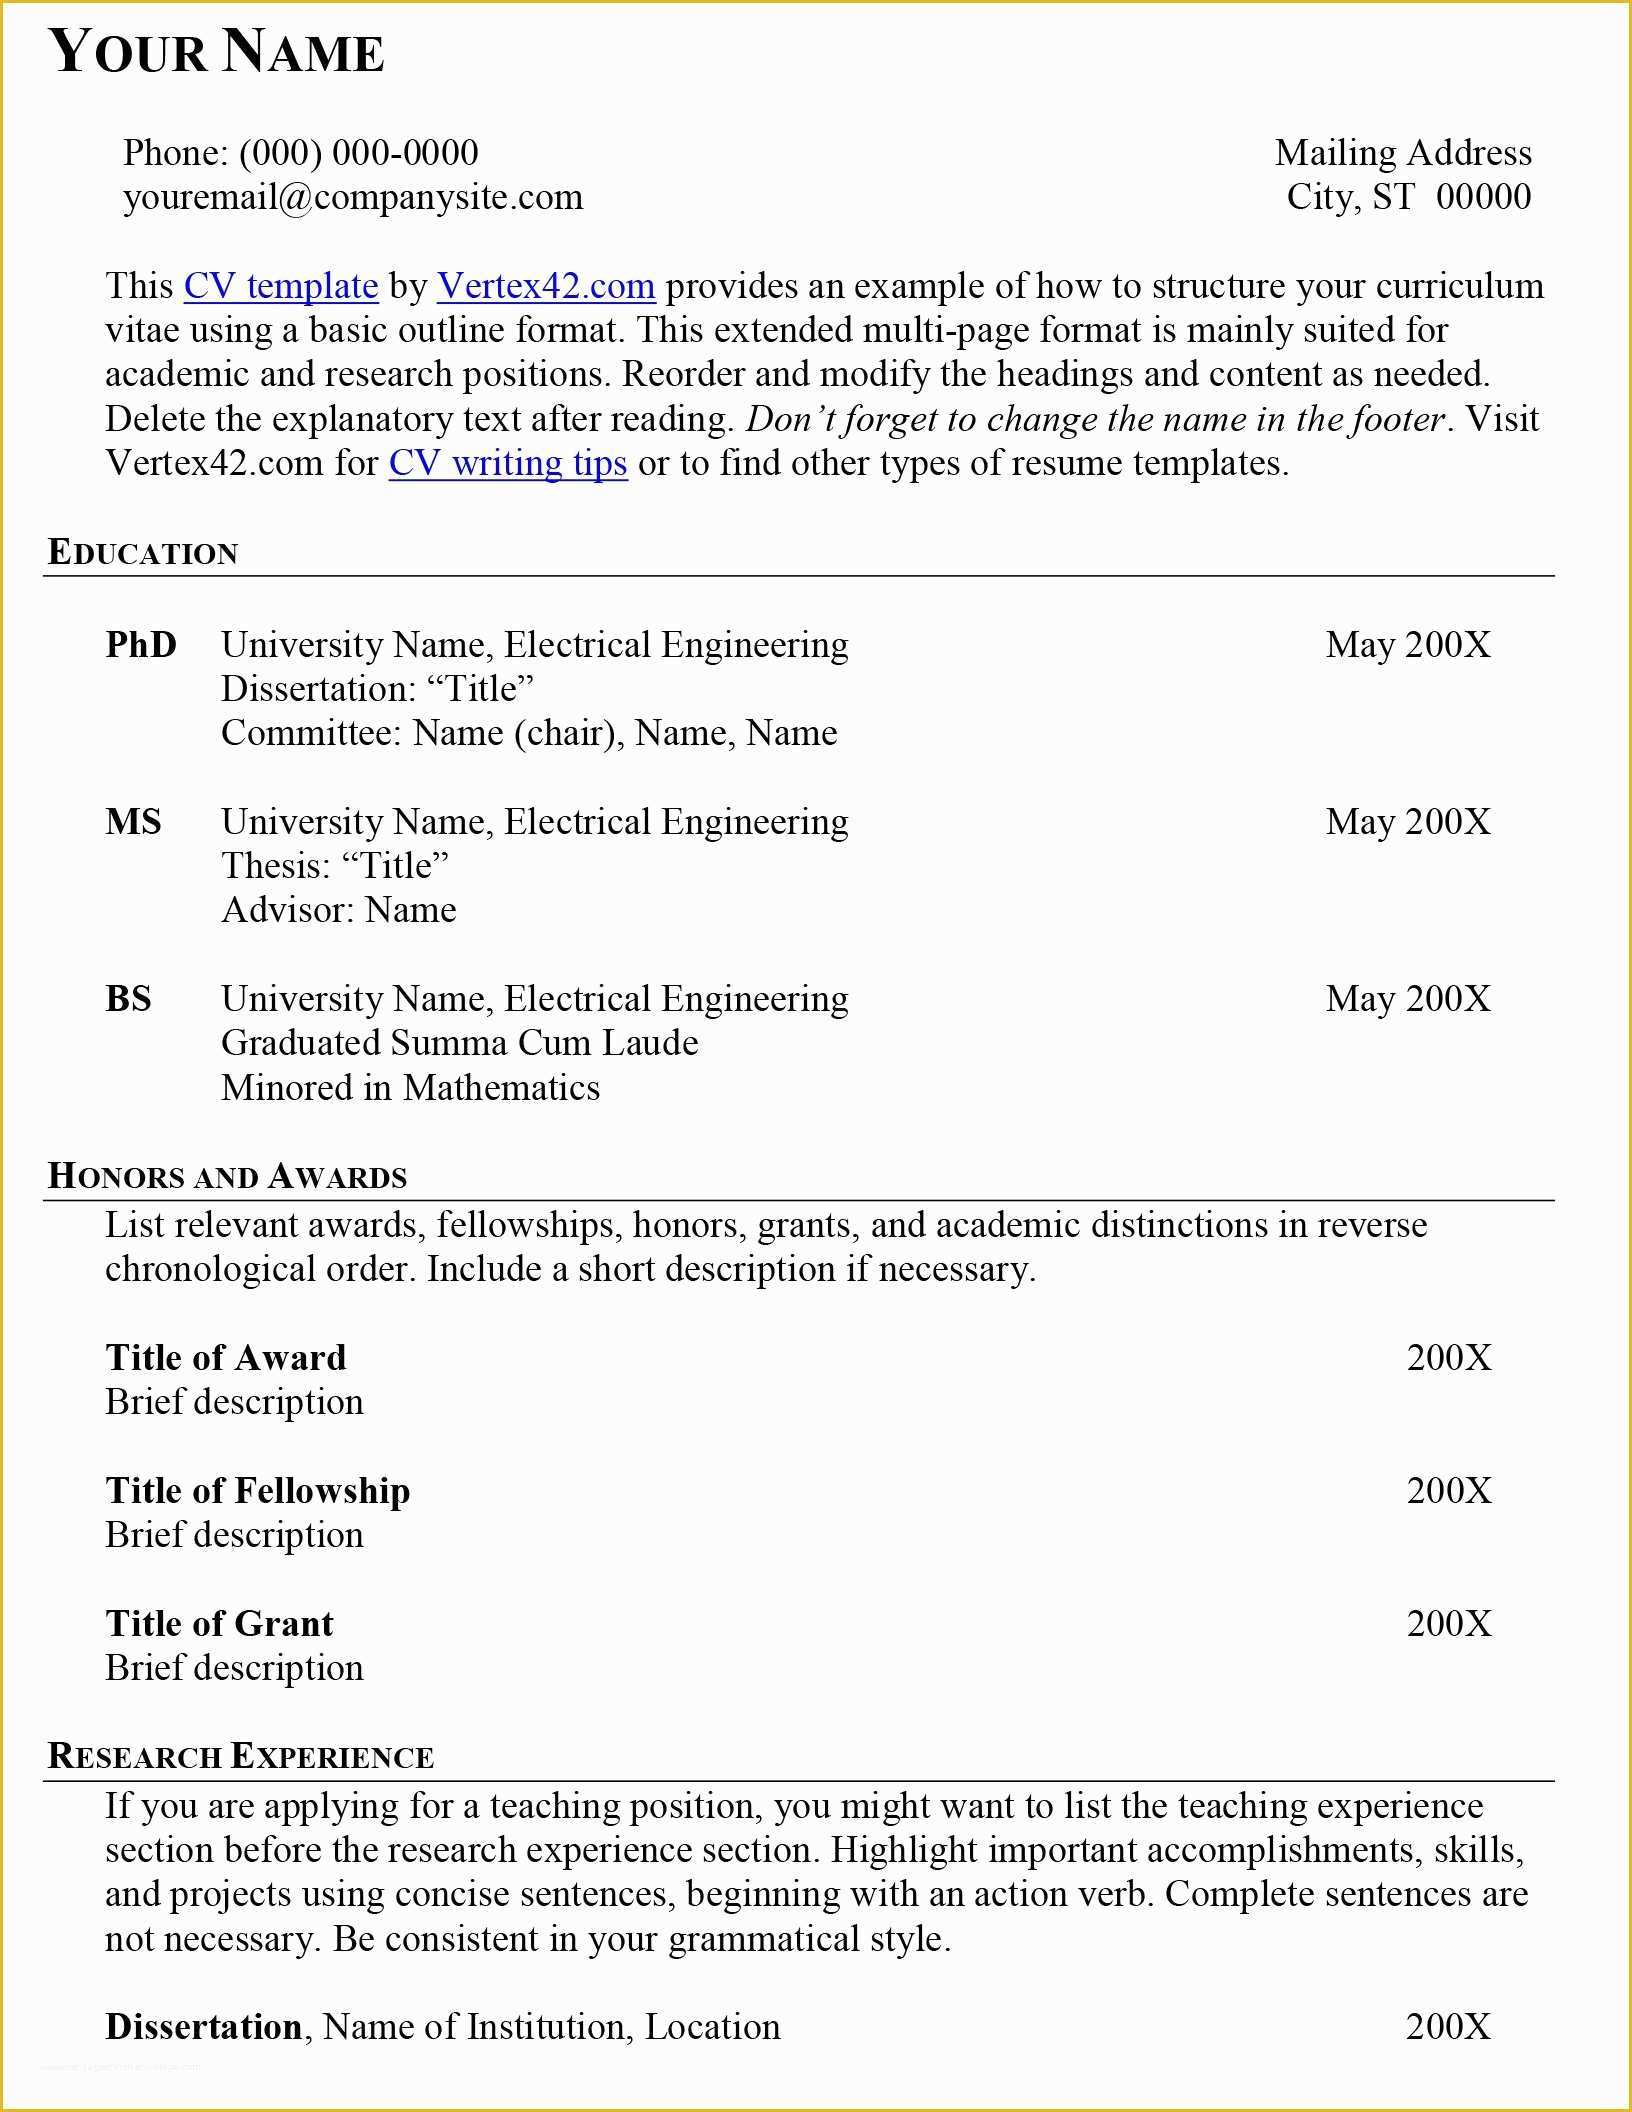 View Free Resume Templates Of Extended Cv Resume